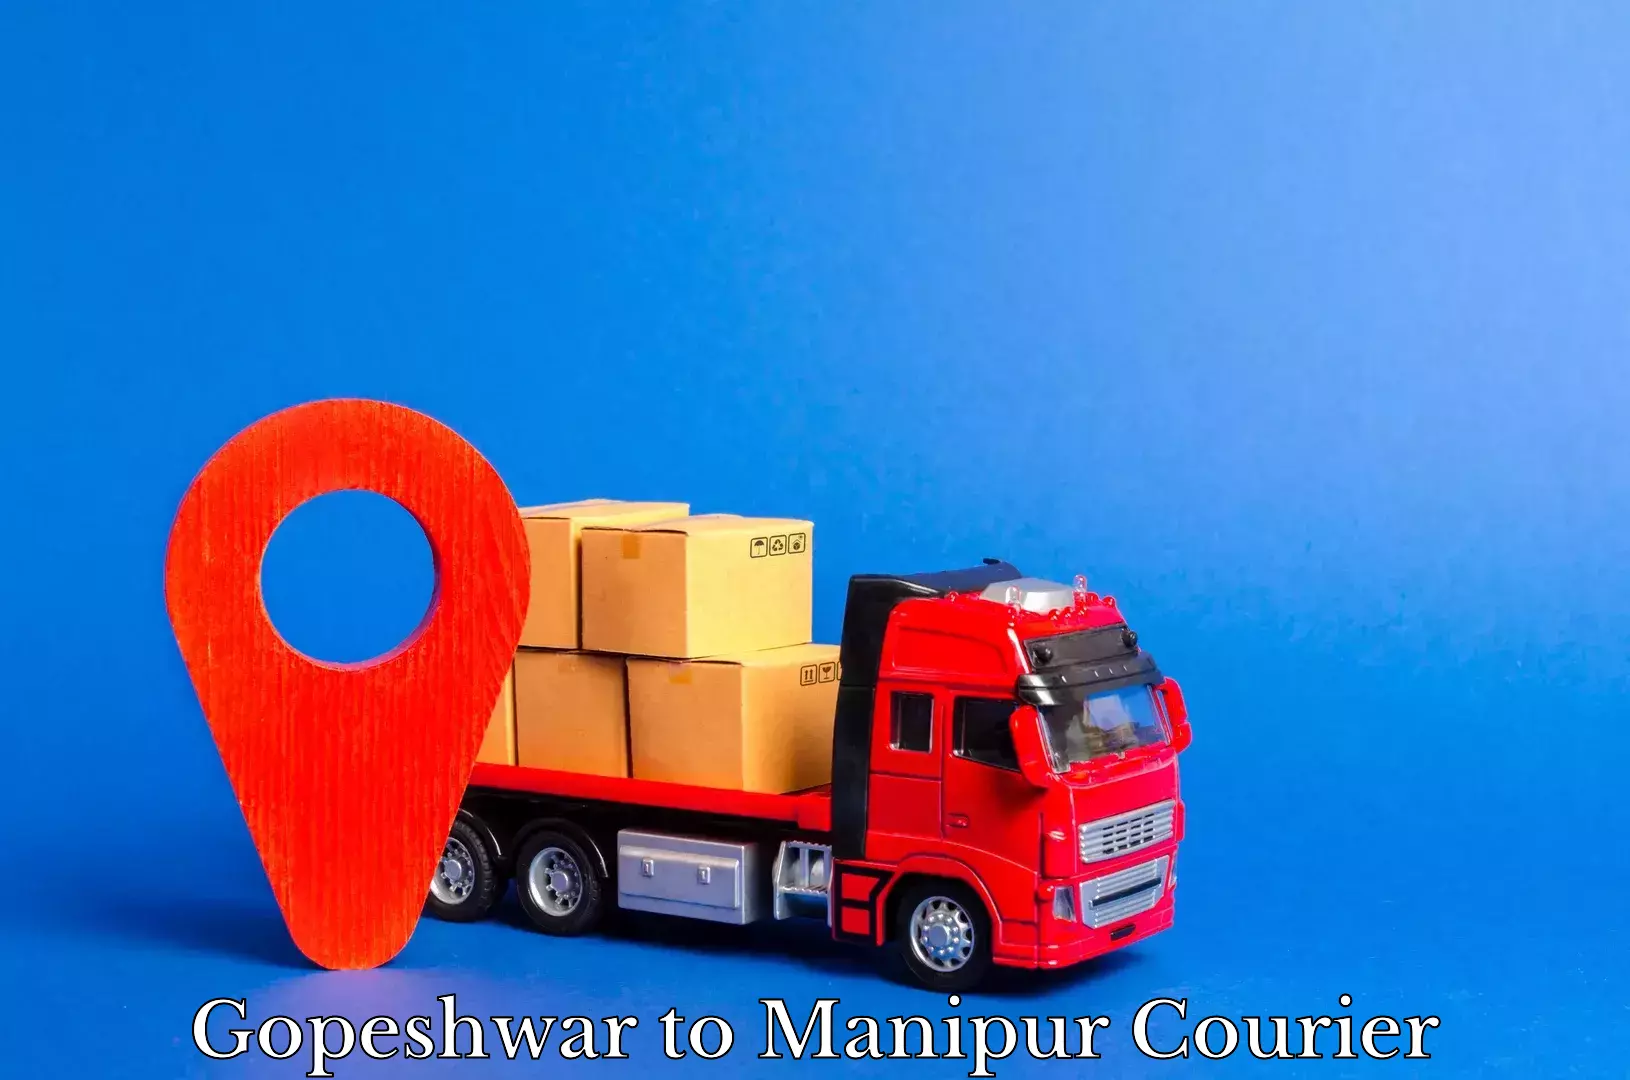 State-of-the-art courier technology Gopeshwar to Manipur